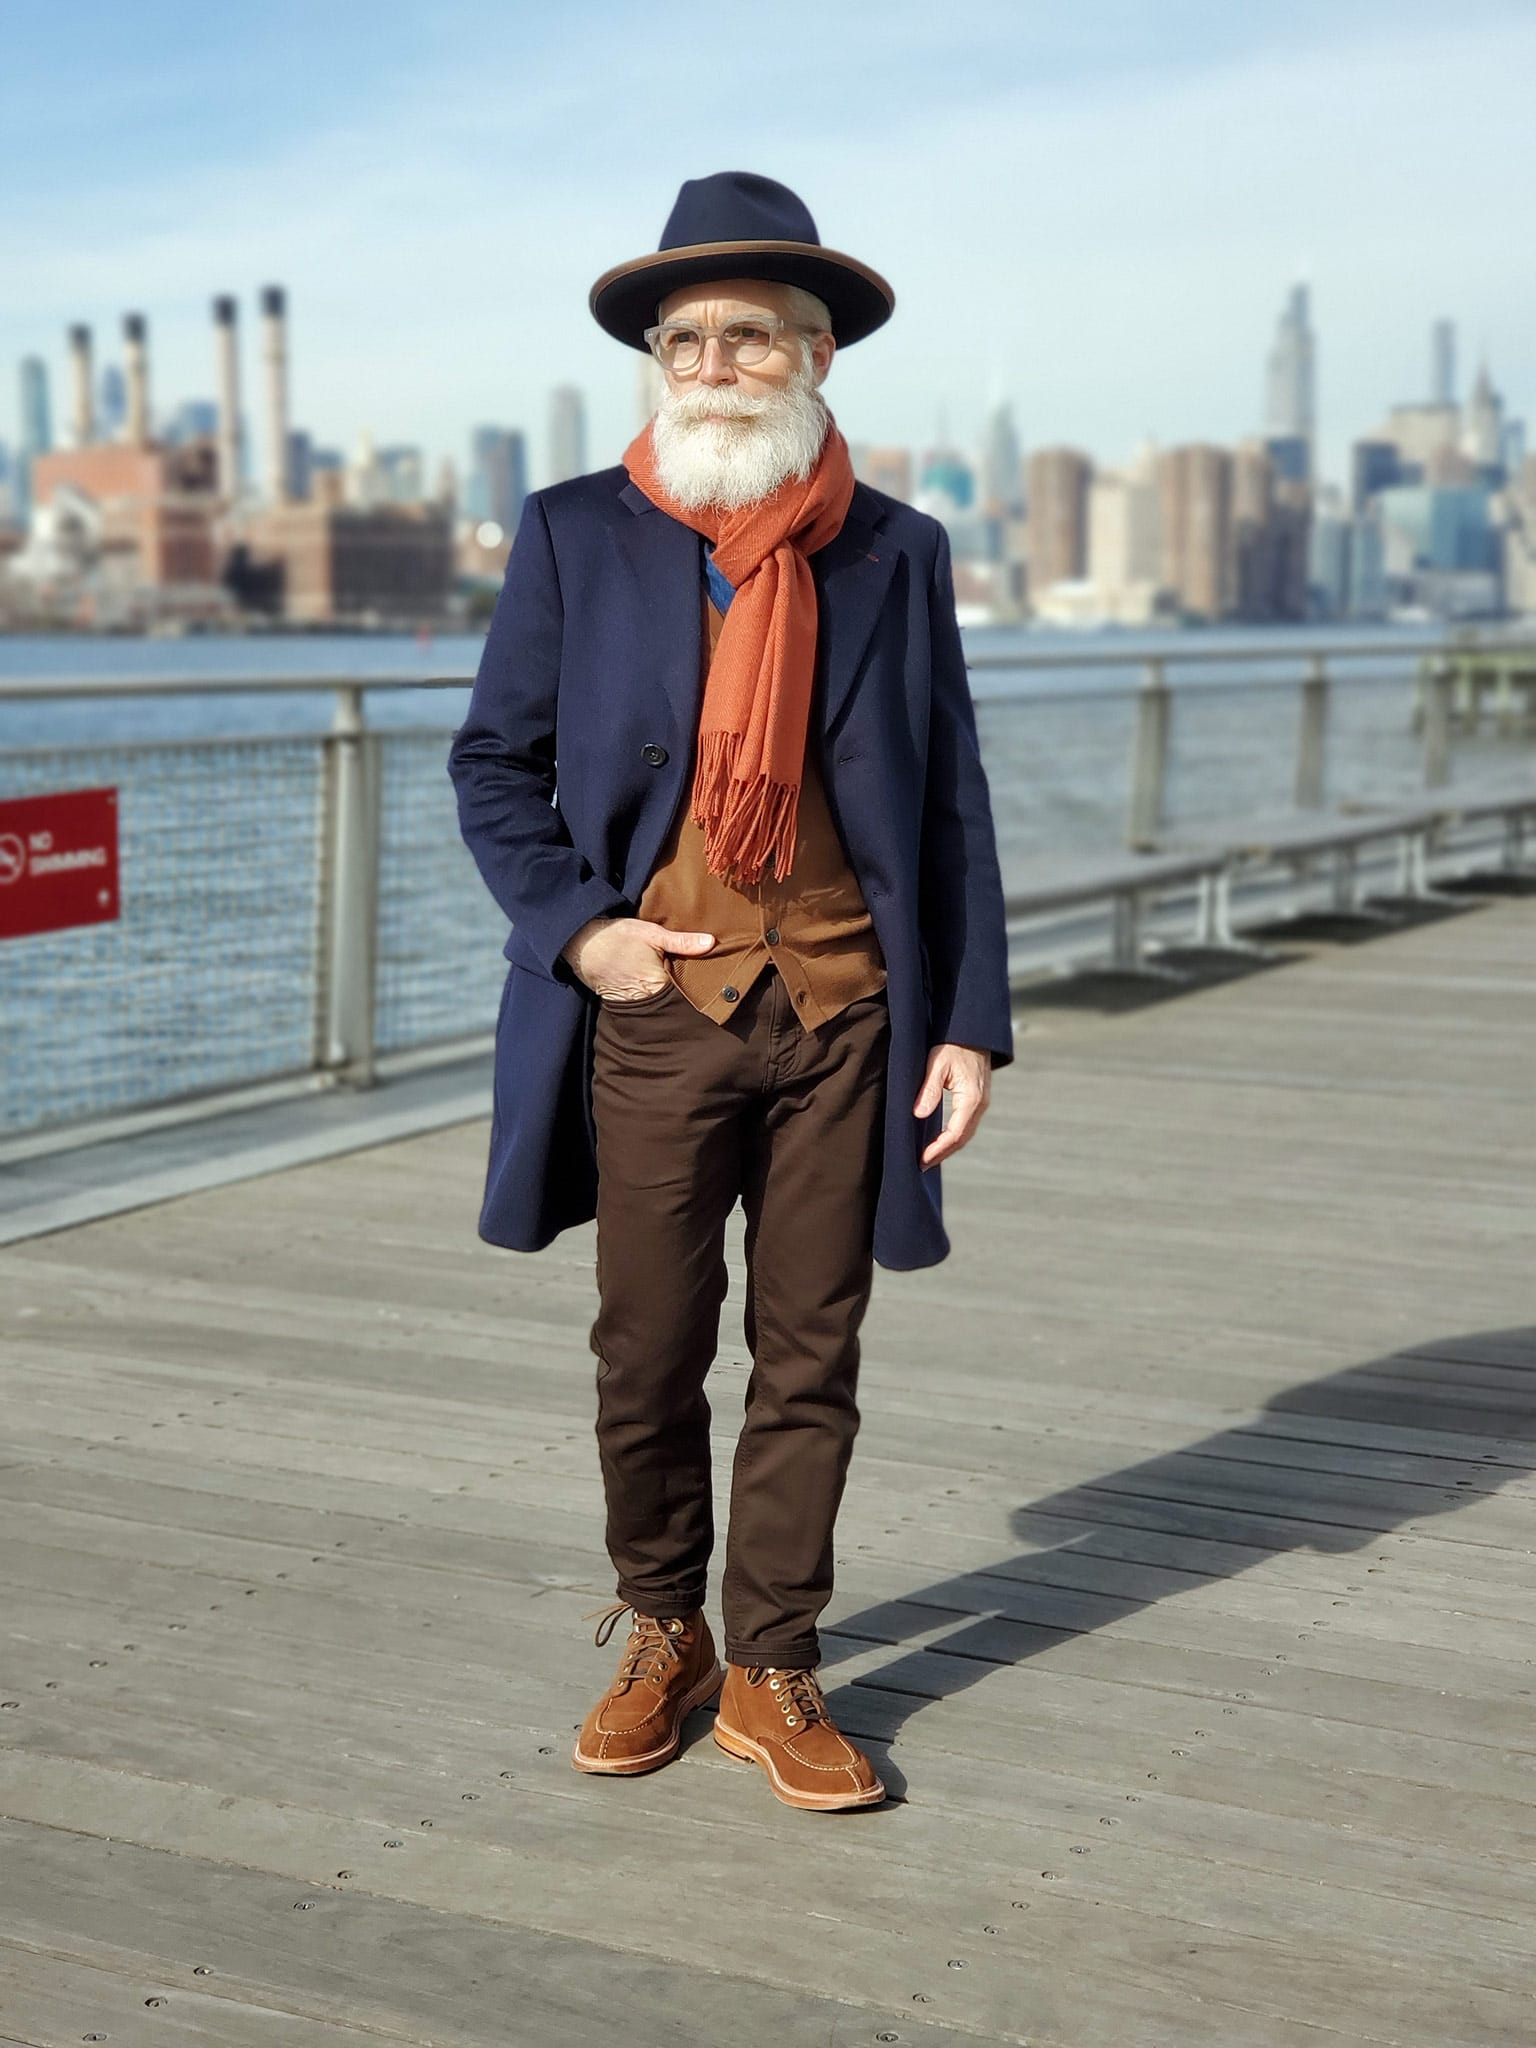 Smart Brown and Blue Fall Layers - The Modest Man